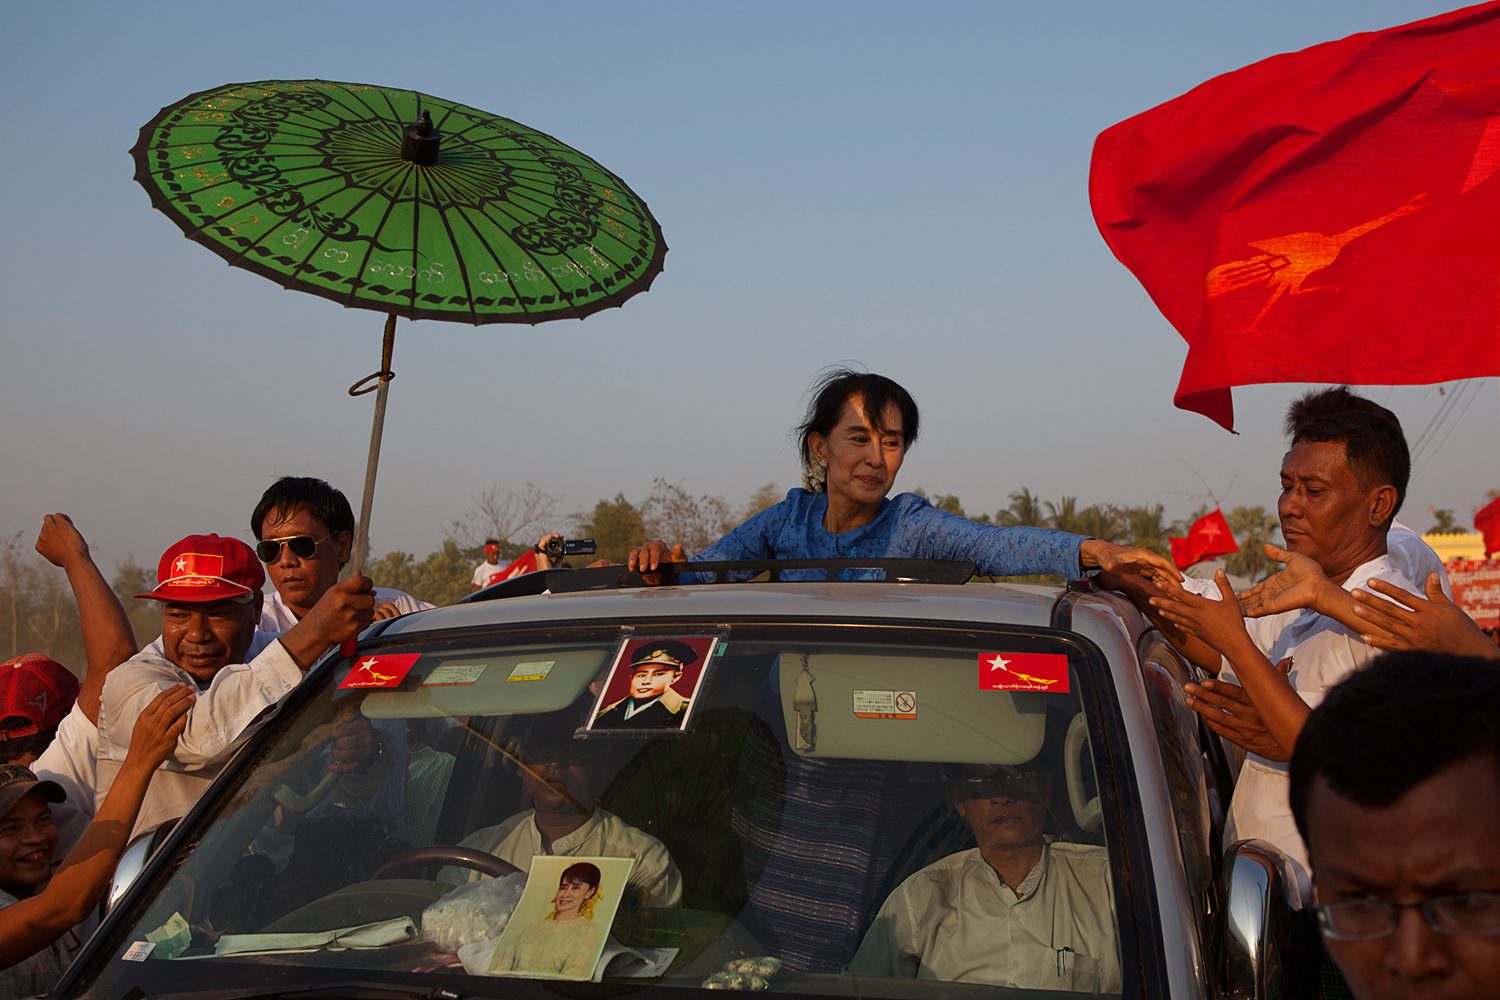 March 22, 2012. Aung San Suu Kyi departs from a campaign rally in Kawhmu, the district from which she ran for a seat in Parliament. She emerges from the sun roof to shake hands with thousands of well-wishers who lined the road. A staff member holds a parasol to protect her from the sun.